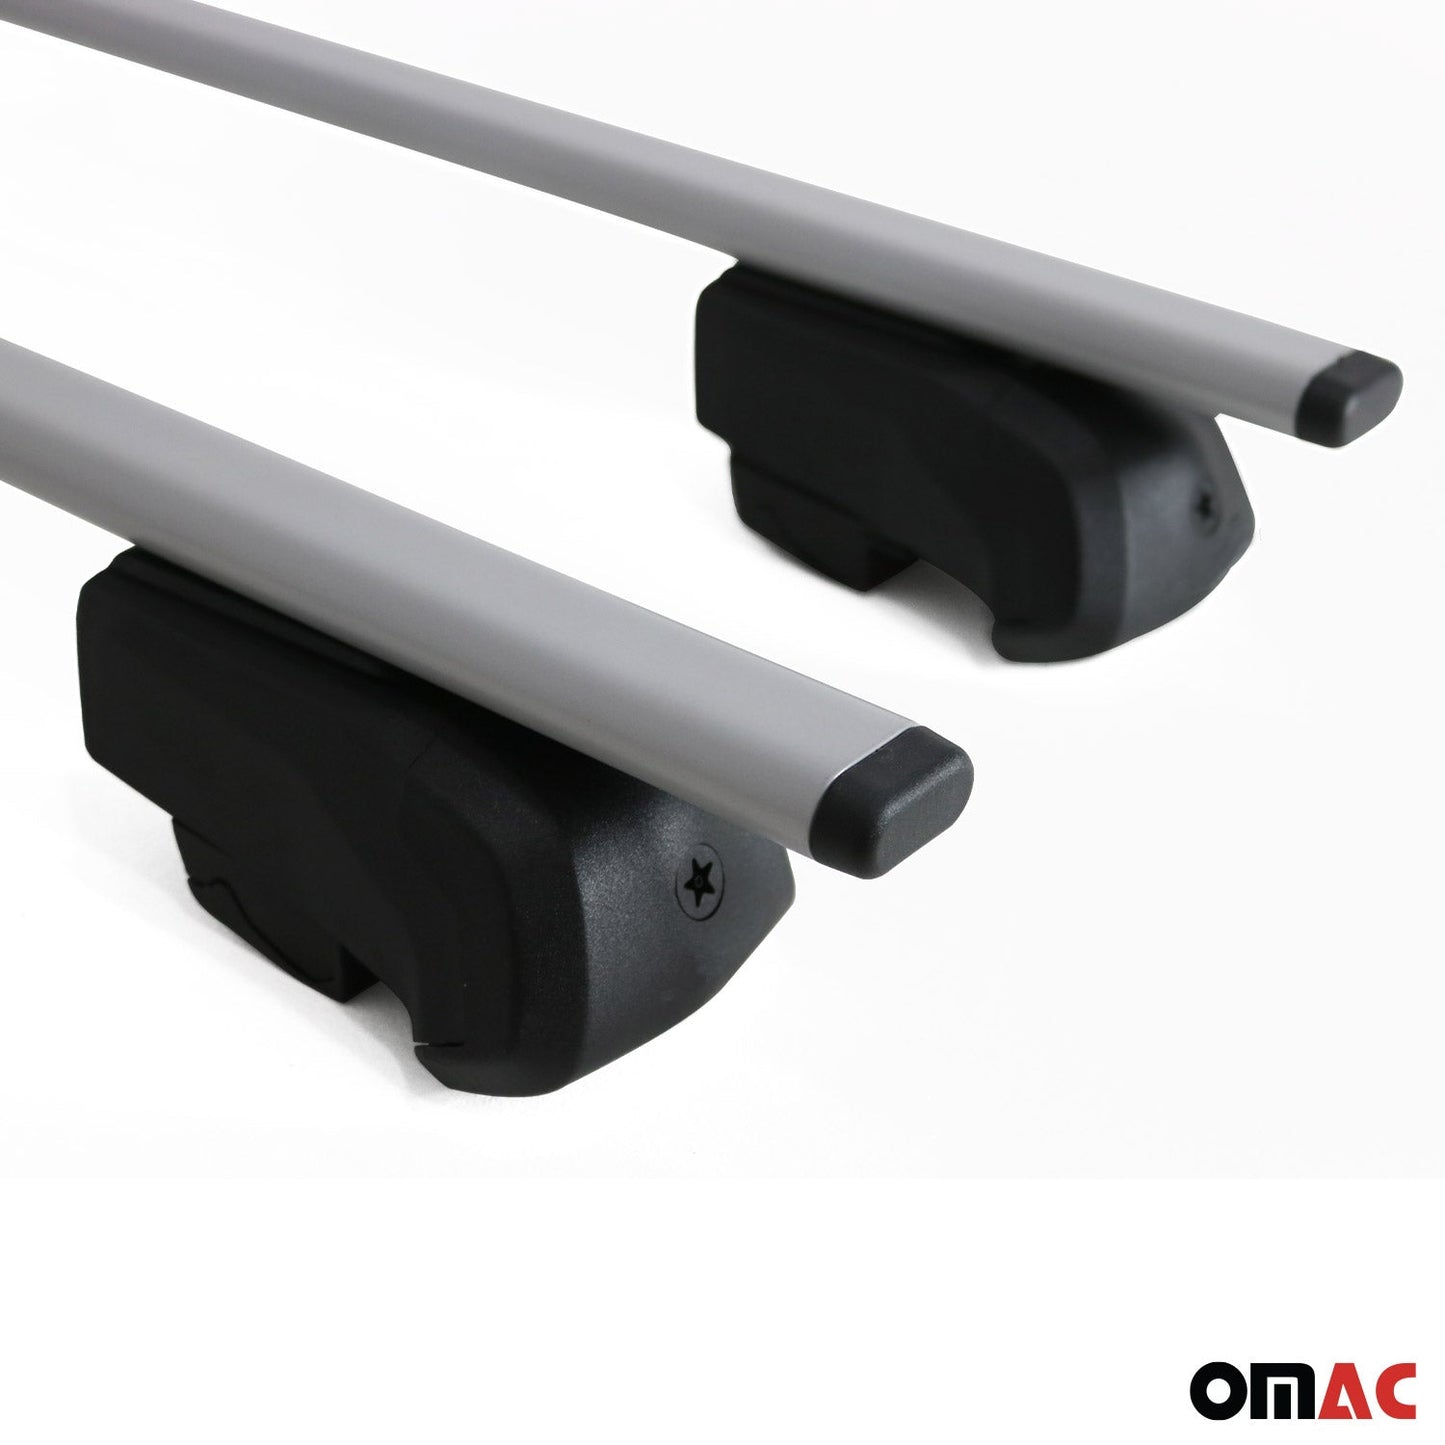 OMAC Roof Racks Luggage Carrier Cross Bars Iron for Lincoln MKX 2016-2018 Gray 2Pcs G003076